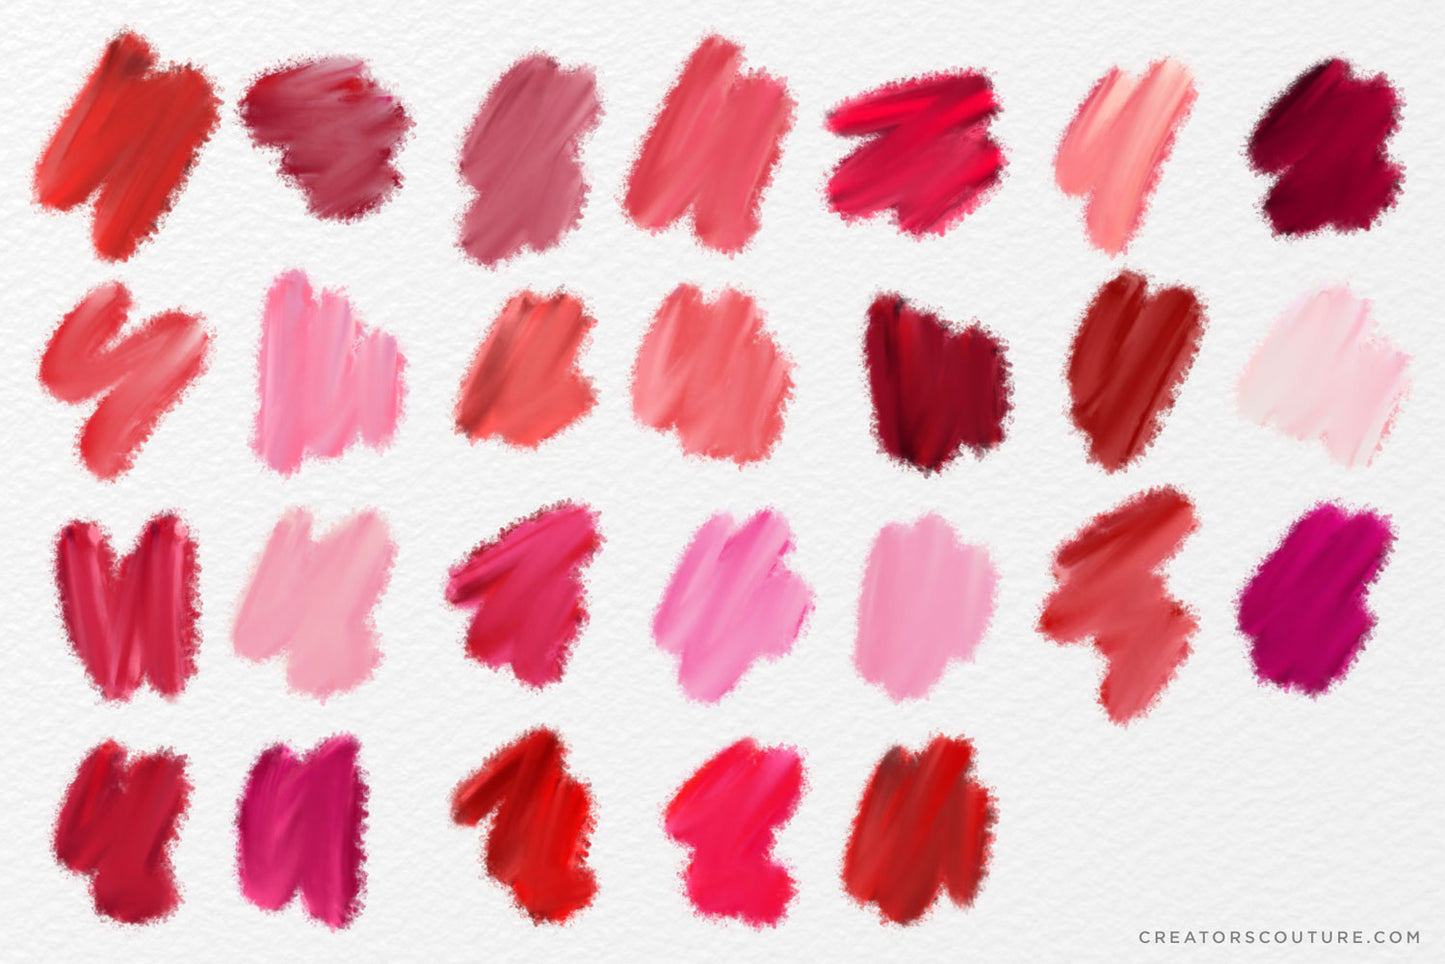 Valentine's Day Photoshop Brush Palettes, Heart Shaped Stamp Brushes, & Ready-Made Backgrounds